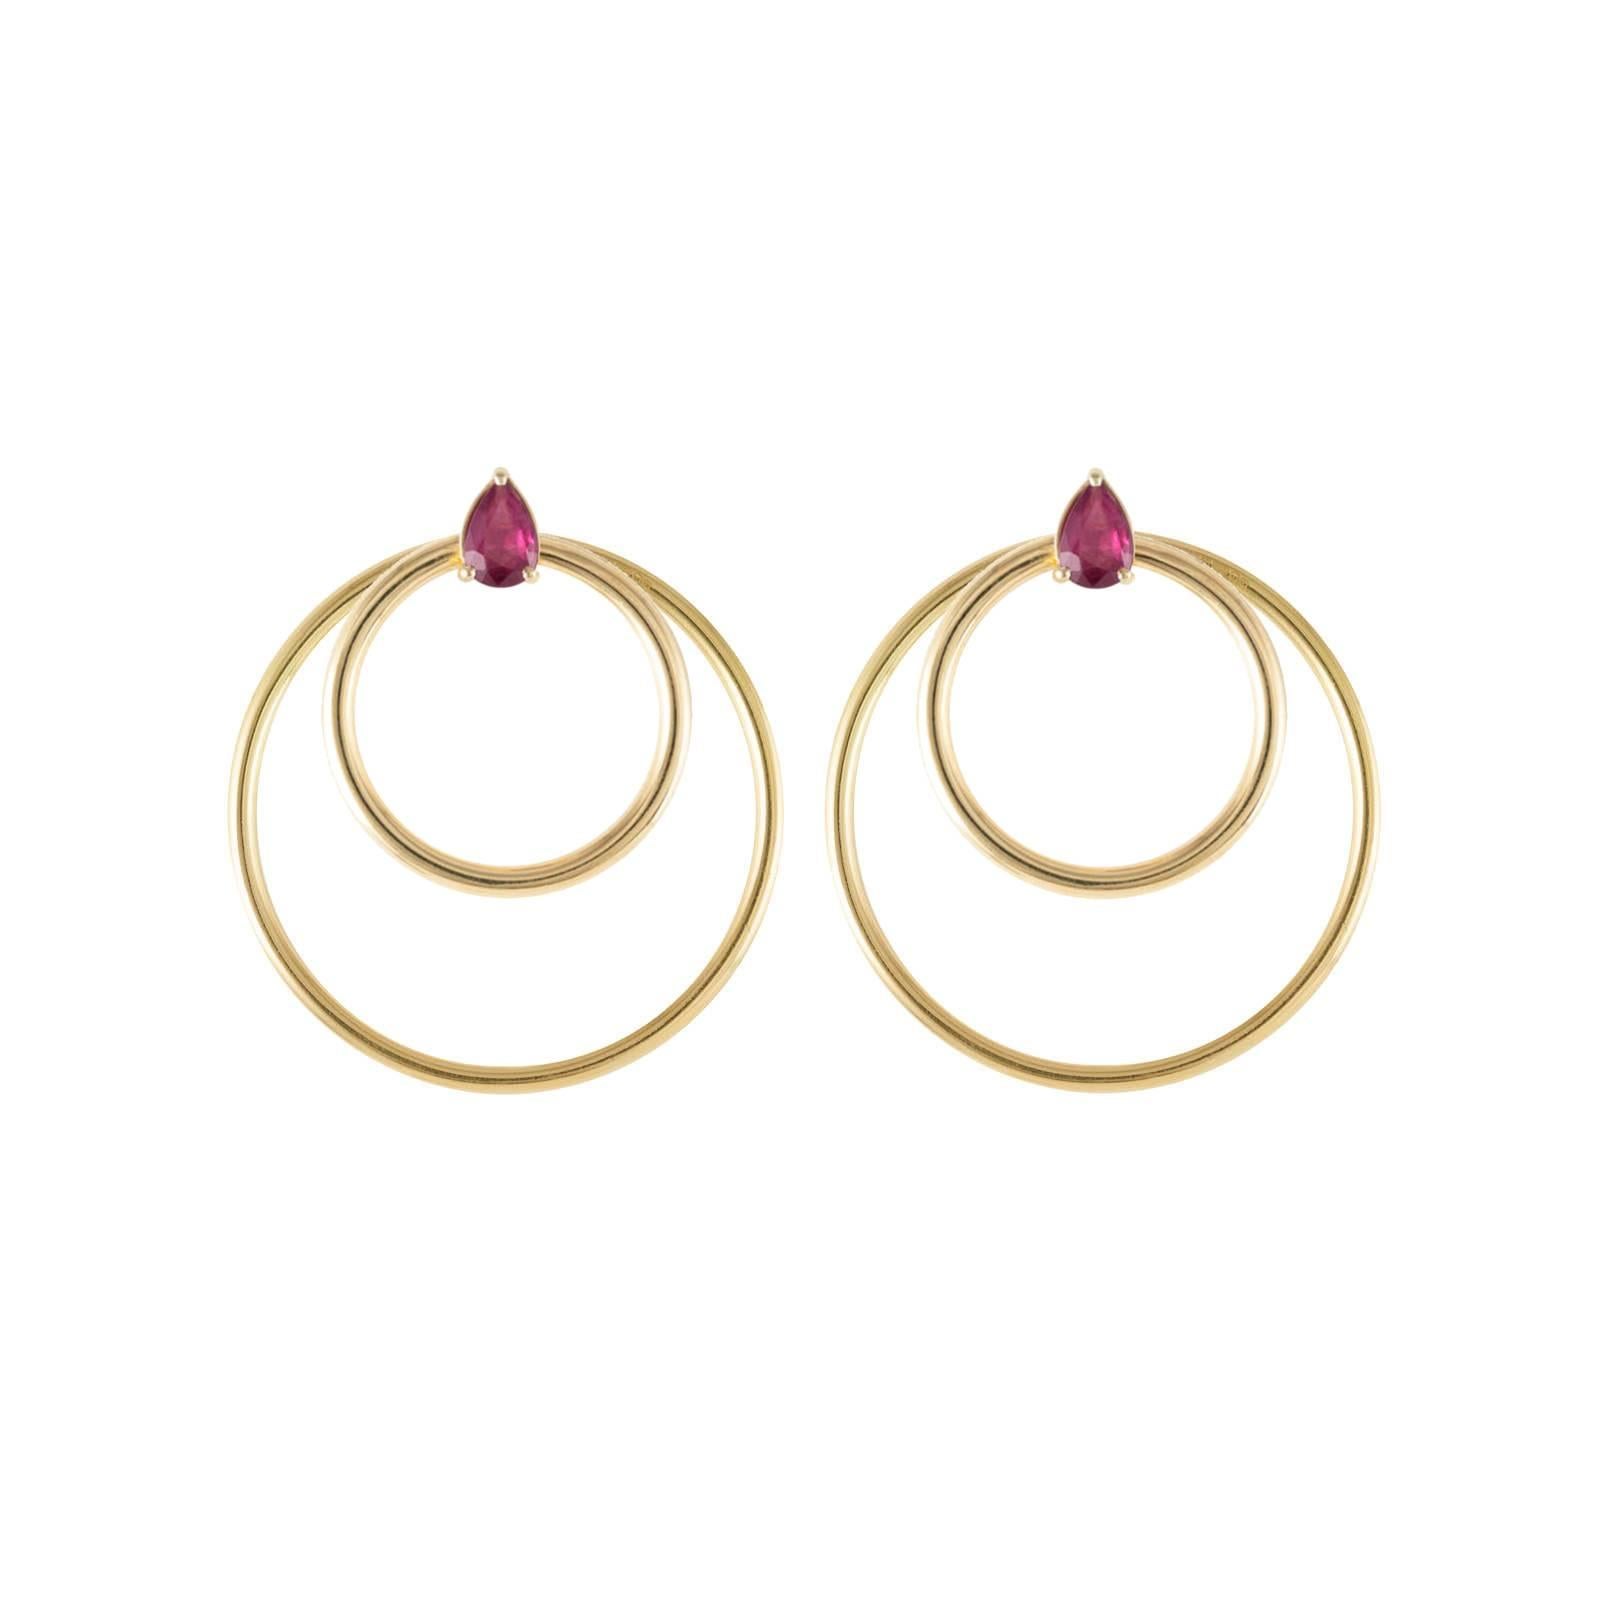 Ruby and yellow gold small front facing hoop earrings and the Large Orbit Hoop Multiplier earring jackets are here sold as a set and offered at a discount. Simple chic earrings set with pear cut rubies in 18 karat yellow gold. Perfectly